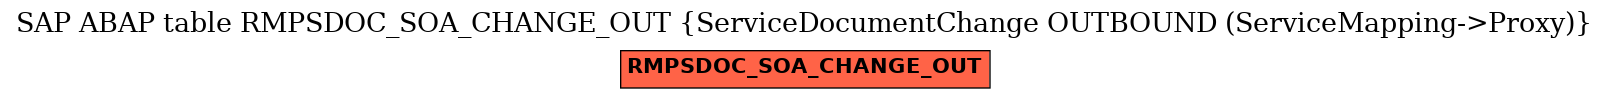 E-R Diagram for table RMPSDOC_SOA_CHANGE_OUT (ServiceDocumentChange OUTBOUND (ServiceMapping->Proxy))